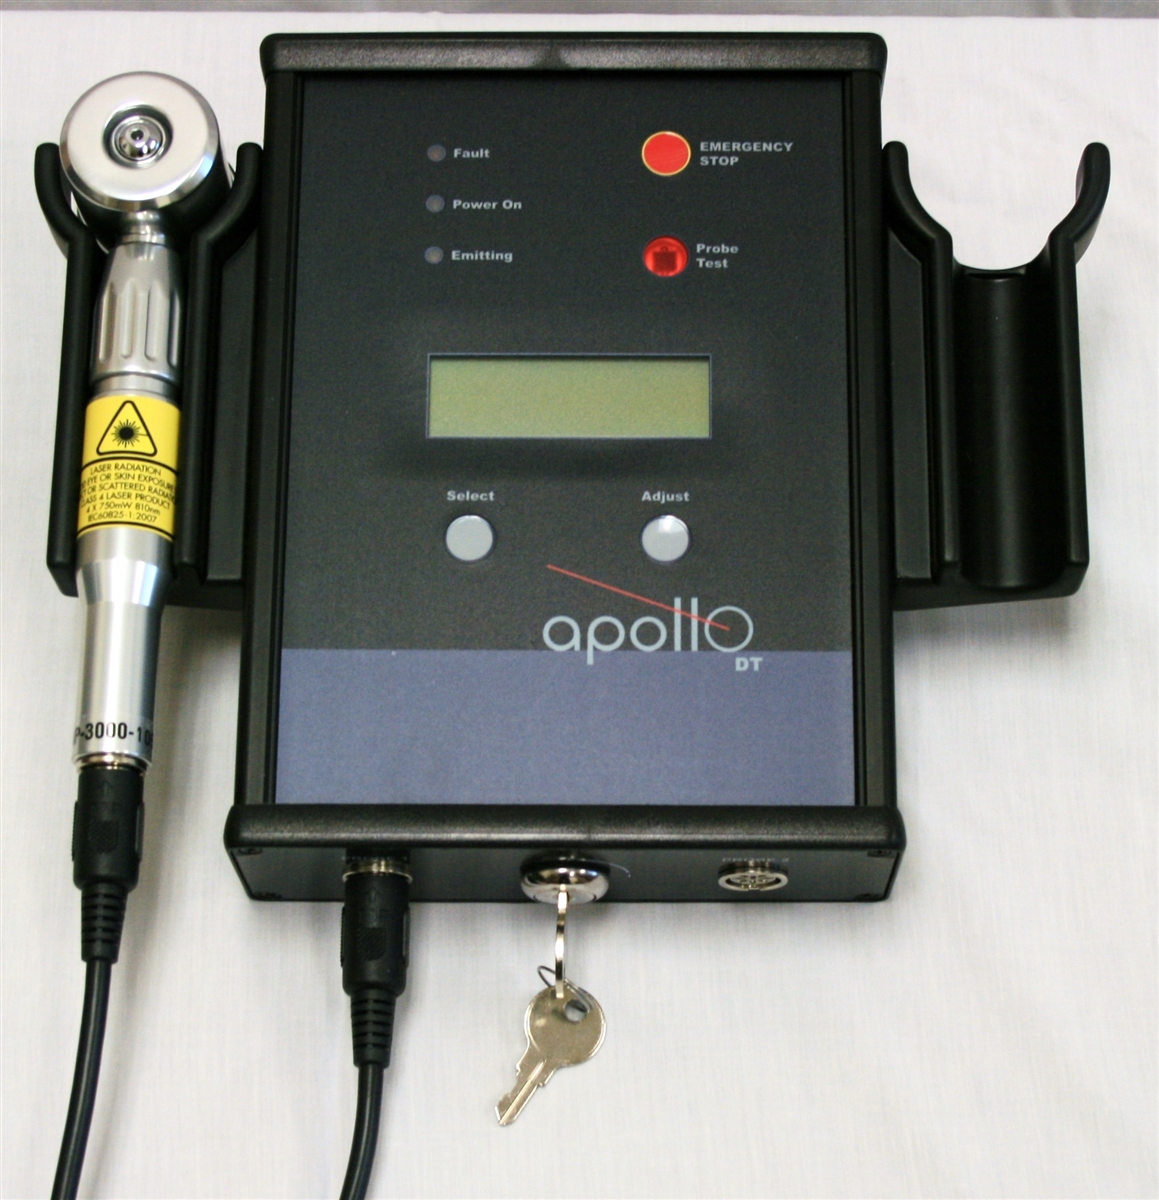 Apollo Desktop Laser System|Best Therapy Laser|Chiropractic Laser Therapy